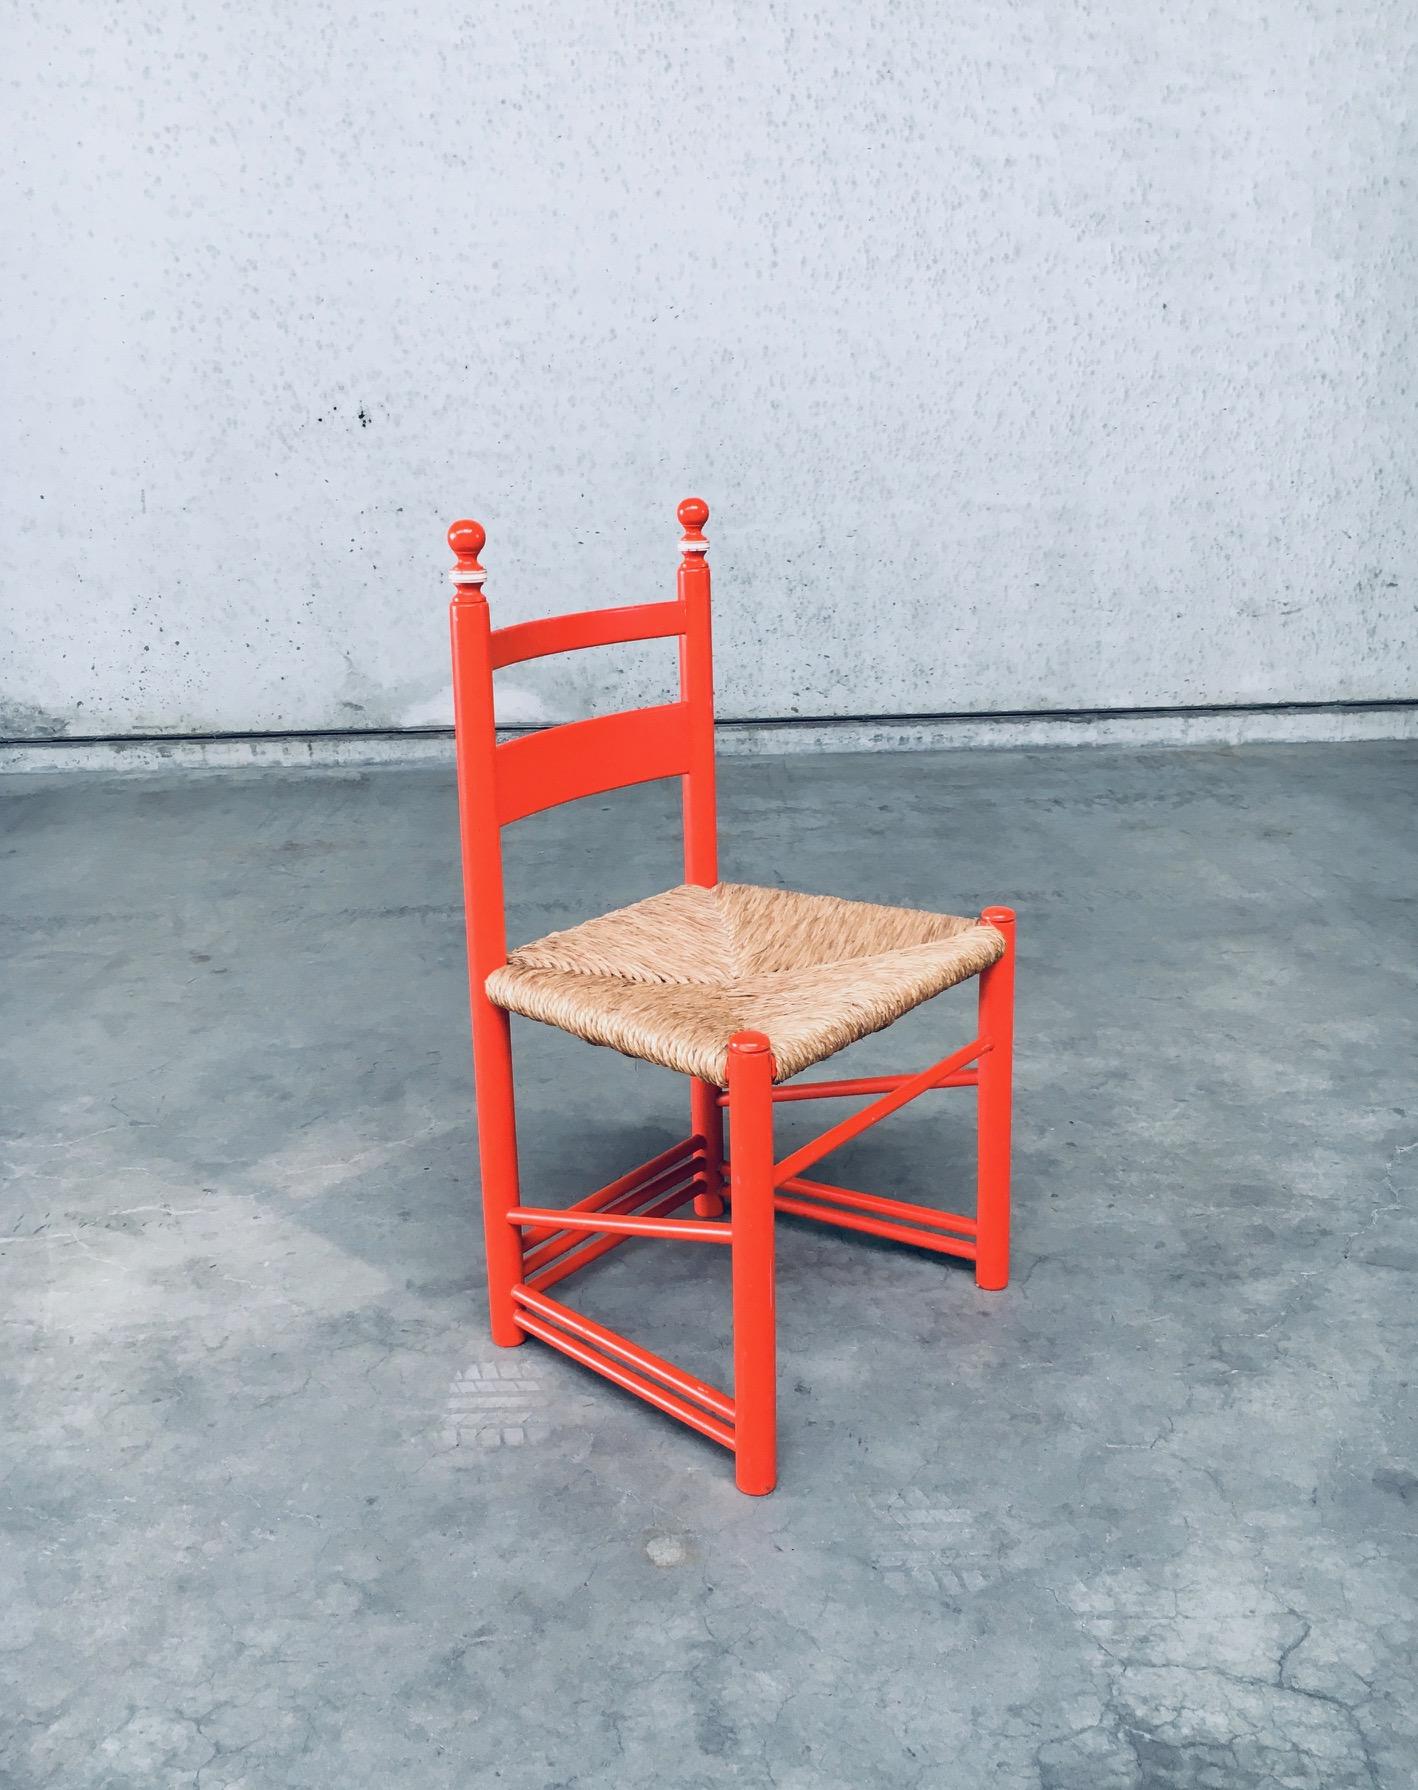 Vintage Austrian Folk Art Side Chair with Rush Seat. Made in Austria, 1970's. Orange painted beech frame with rush woven seat. The chair has nice spindles at the base which makes it rather unusual. This comes in very good, original condition.